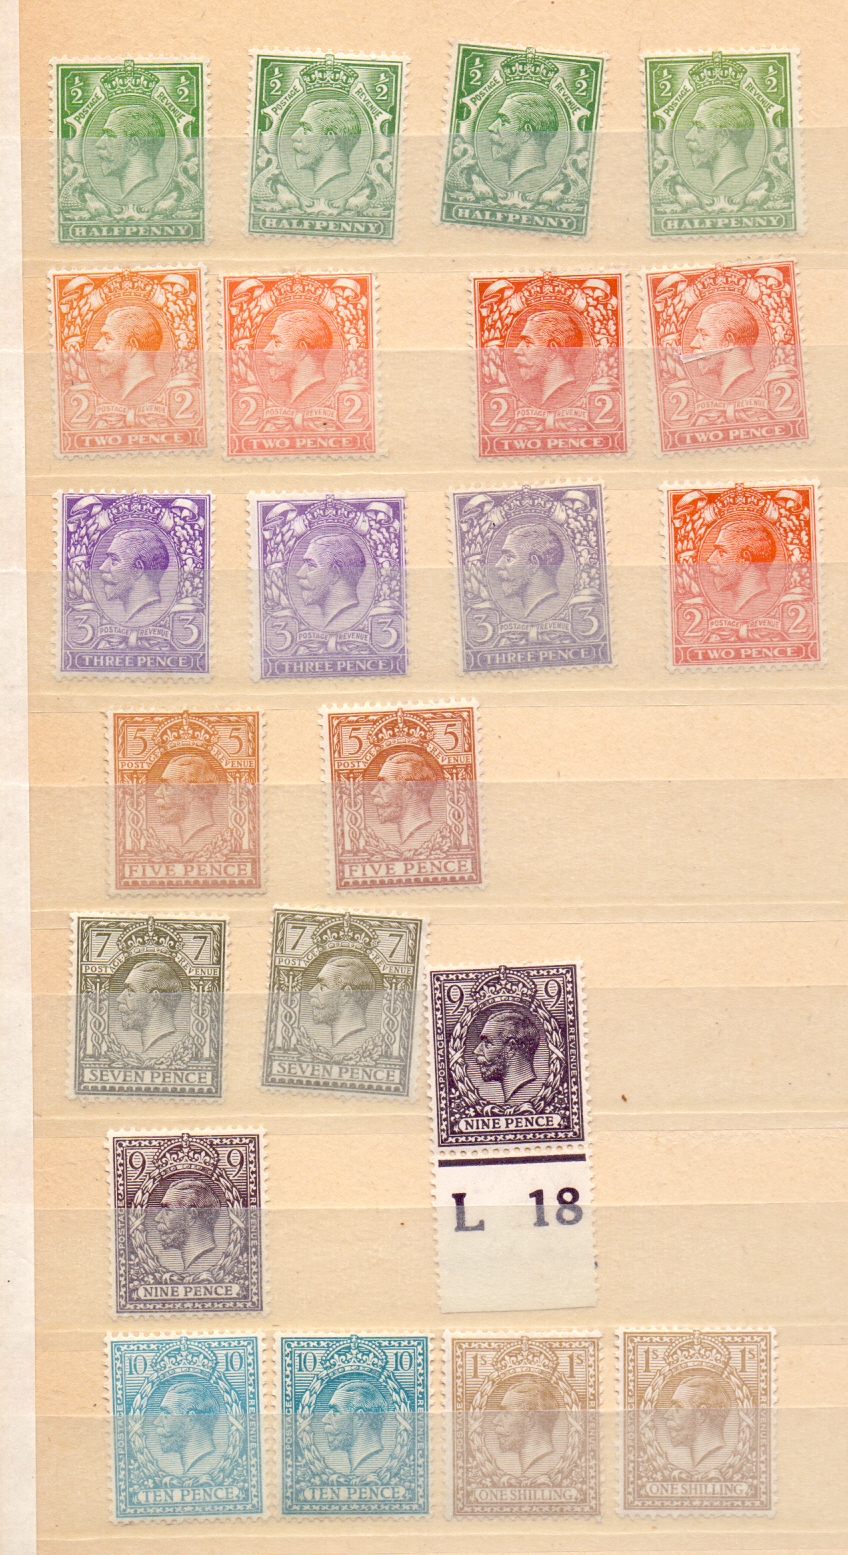 GREAT BRITAIN STAMPS : Stock page of mainly mounted mint GV Royal Cypher issues to 1/- ,